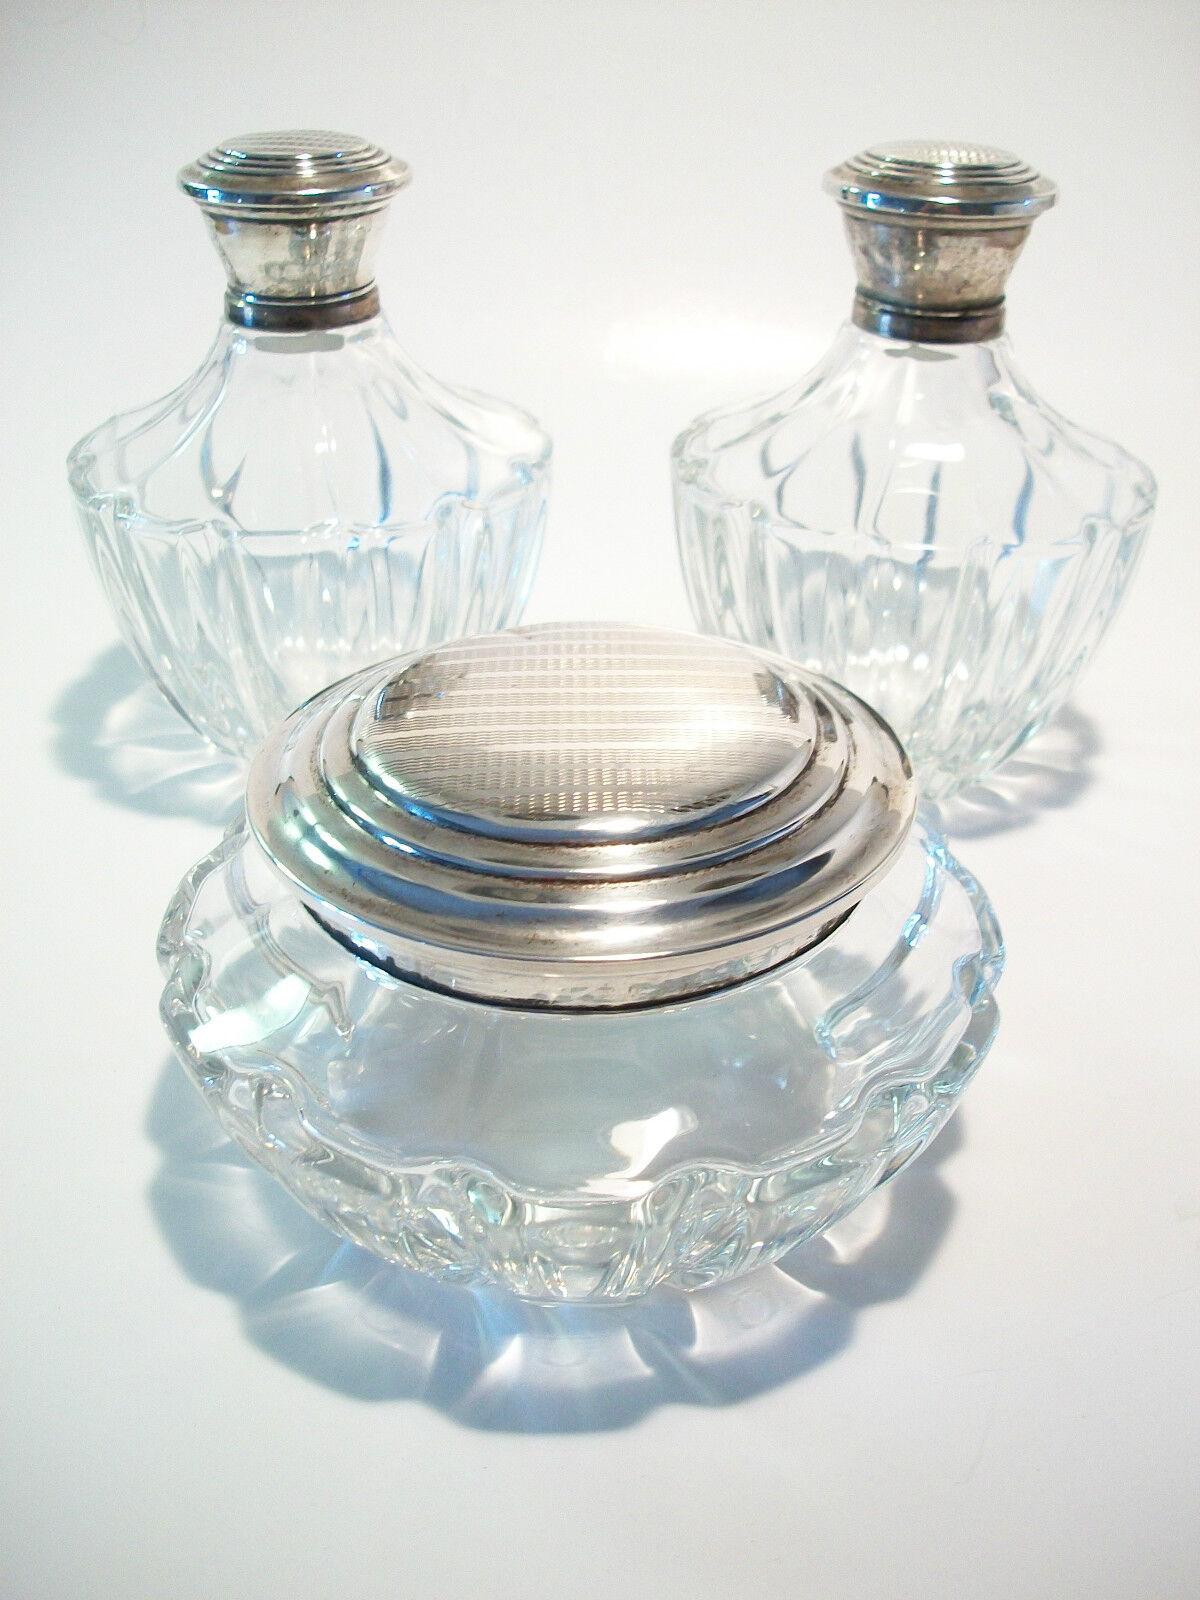 Art Deco Vintage Three Piece Vanity Set - Silver Plate & Crystal - Early 20th Century For Sale